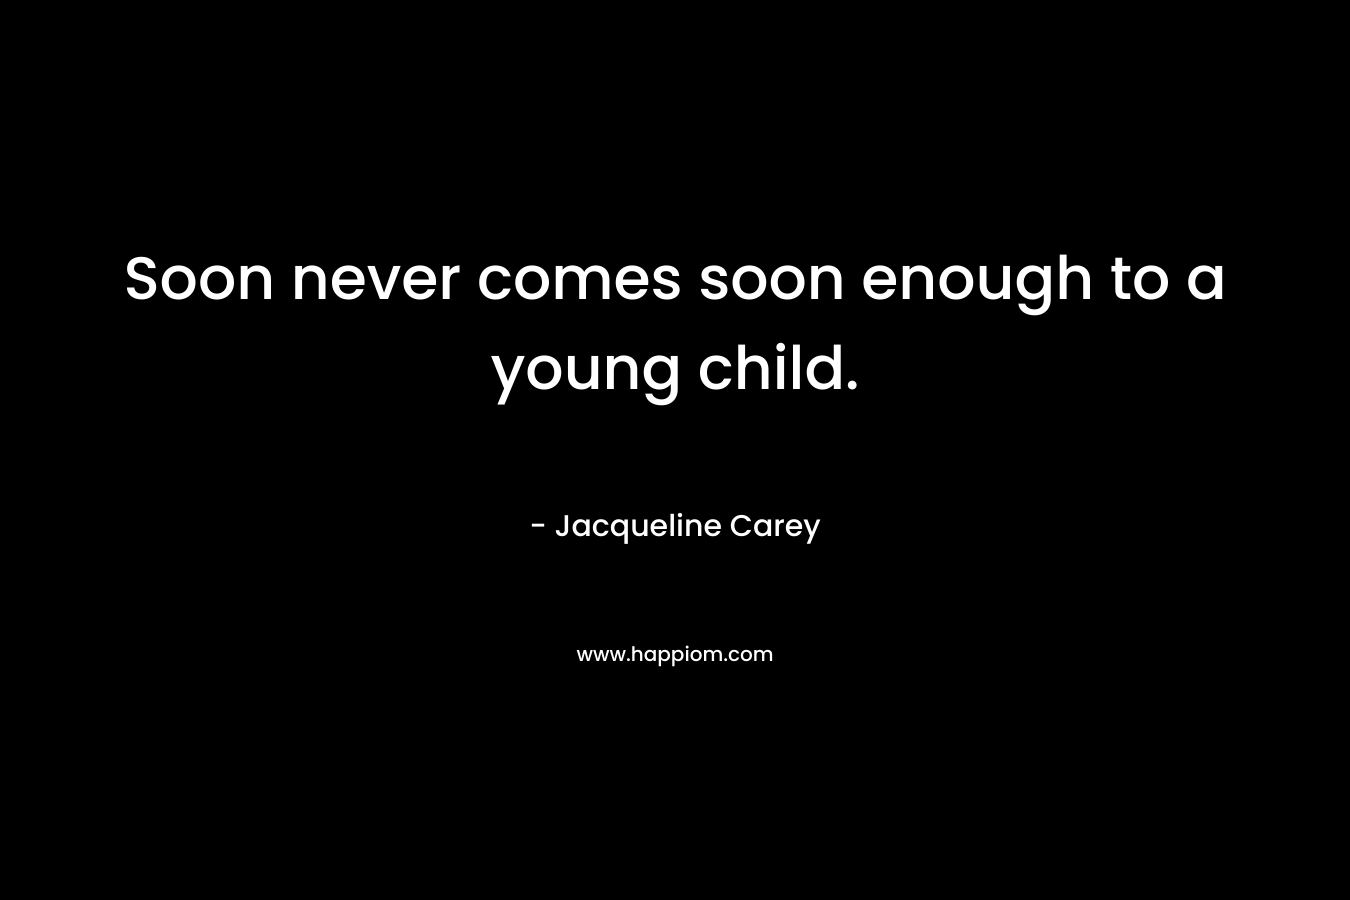 Soon never comes soon enough to a young child. – Jacqueline Carey